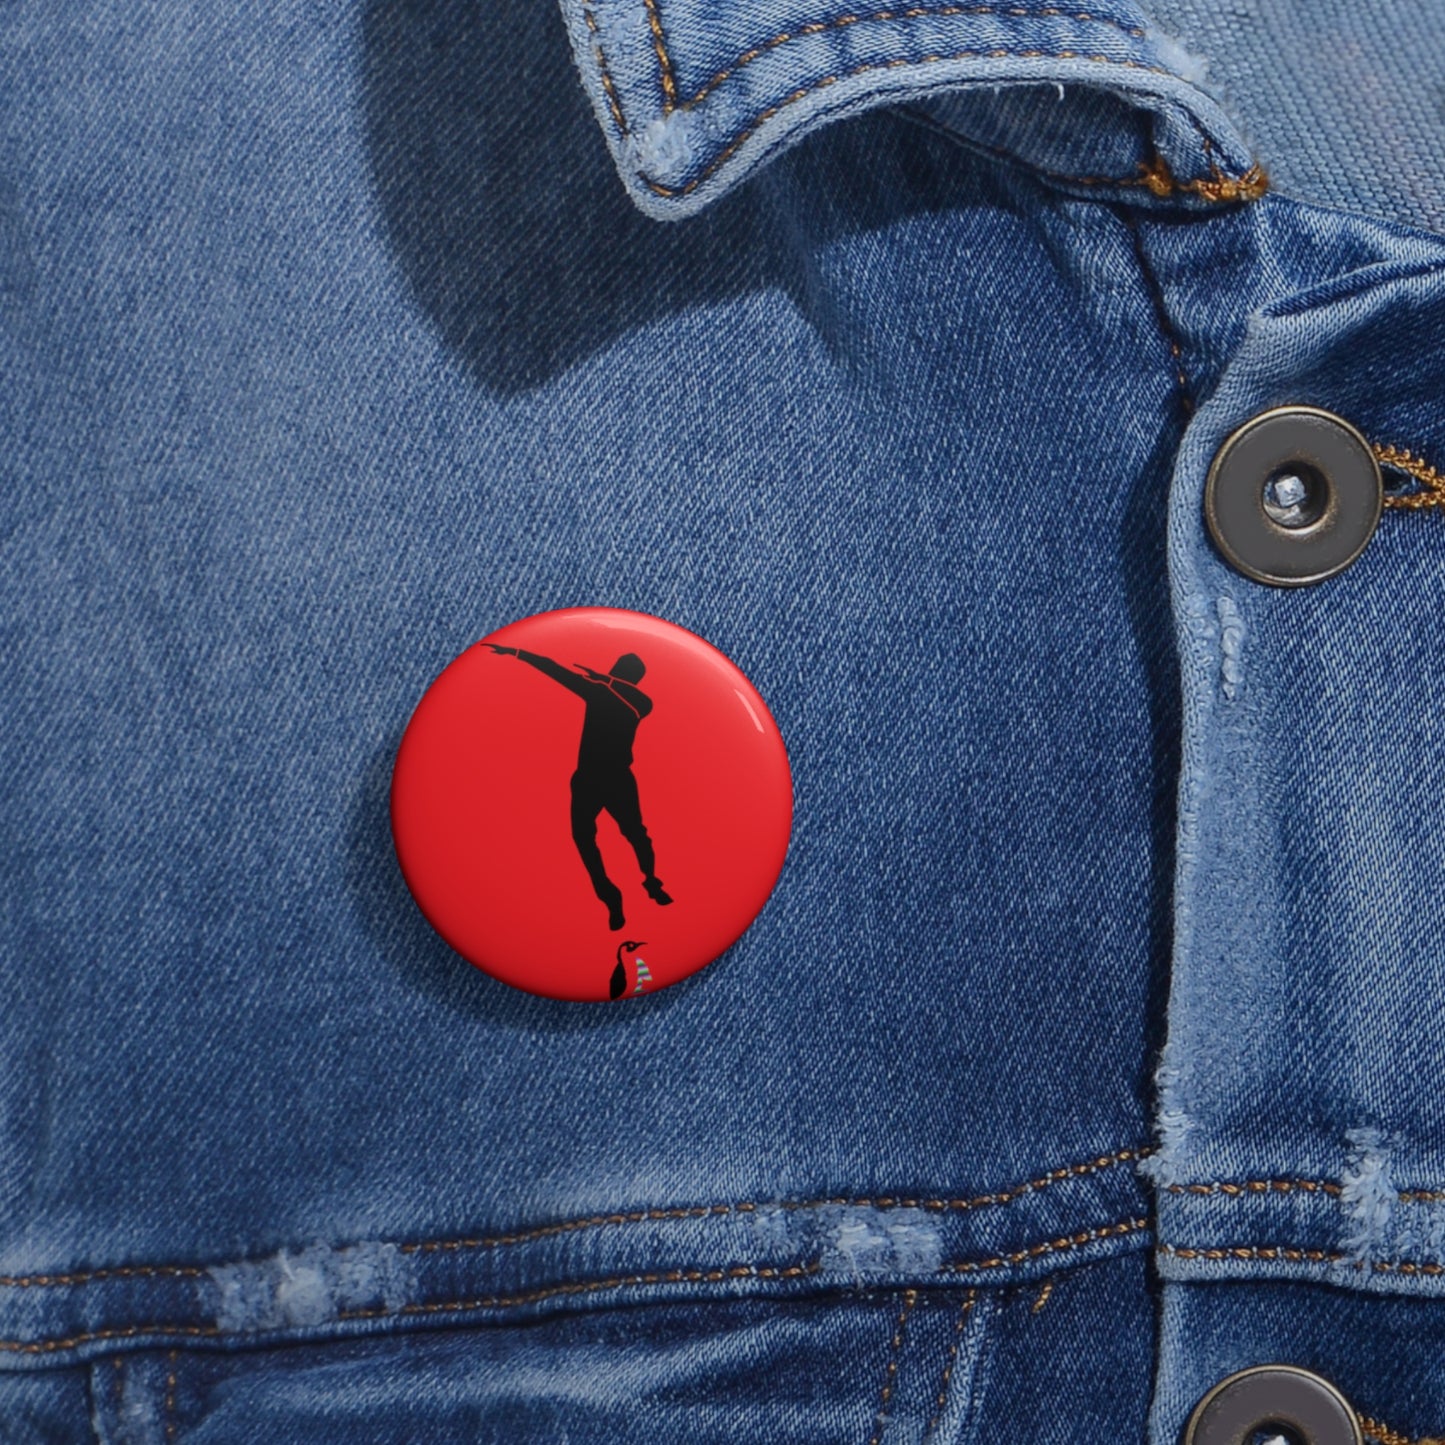 Custom Pin Buttons Dance Red